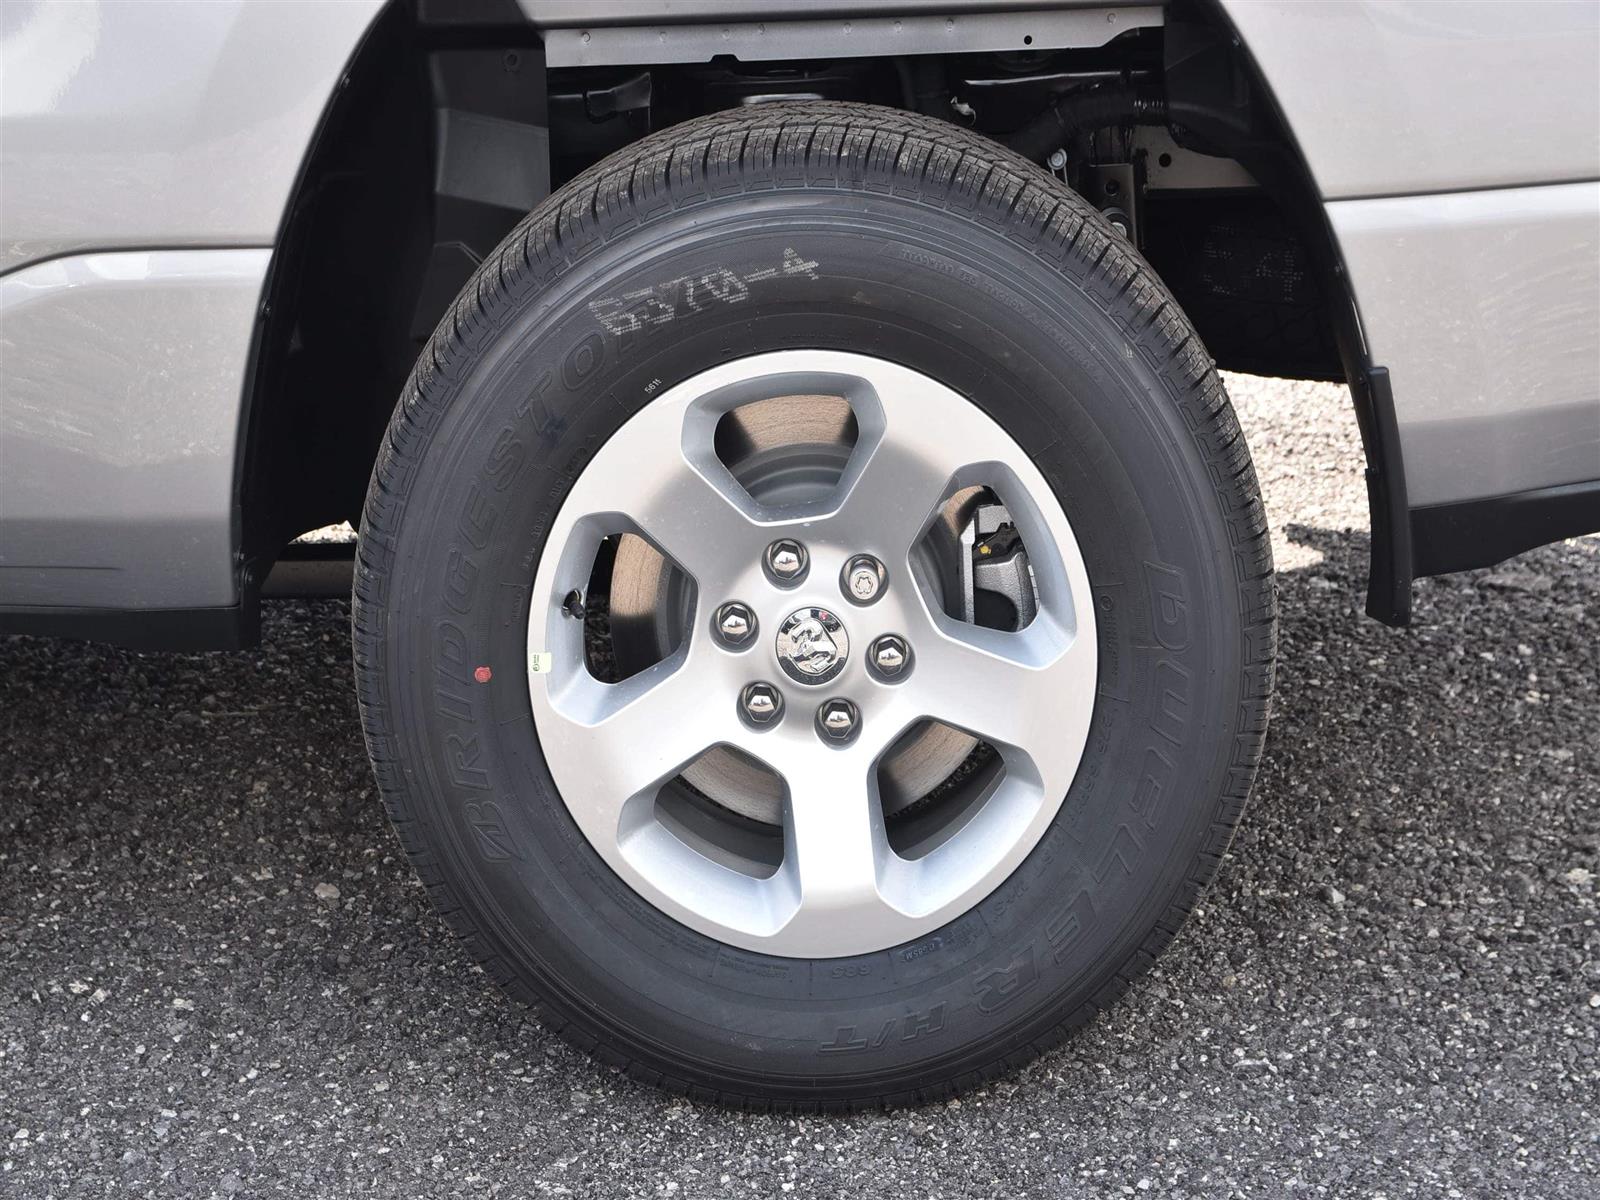 Used 2019 Ram 1500 in Concord,ON